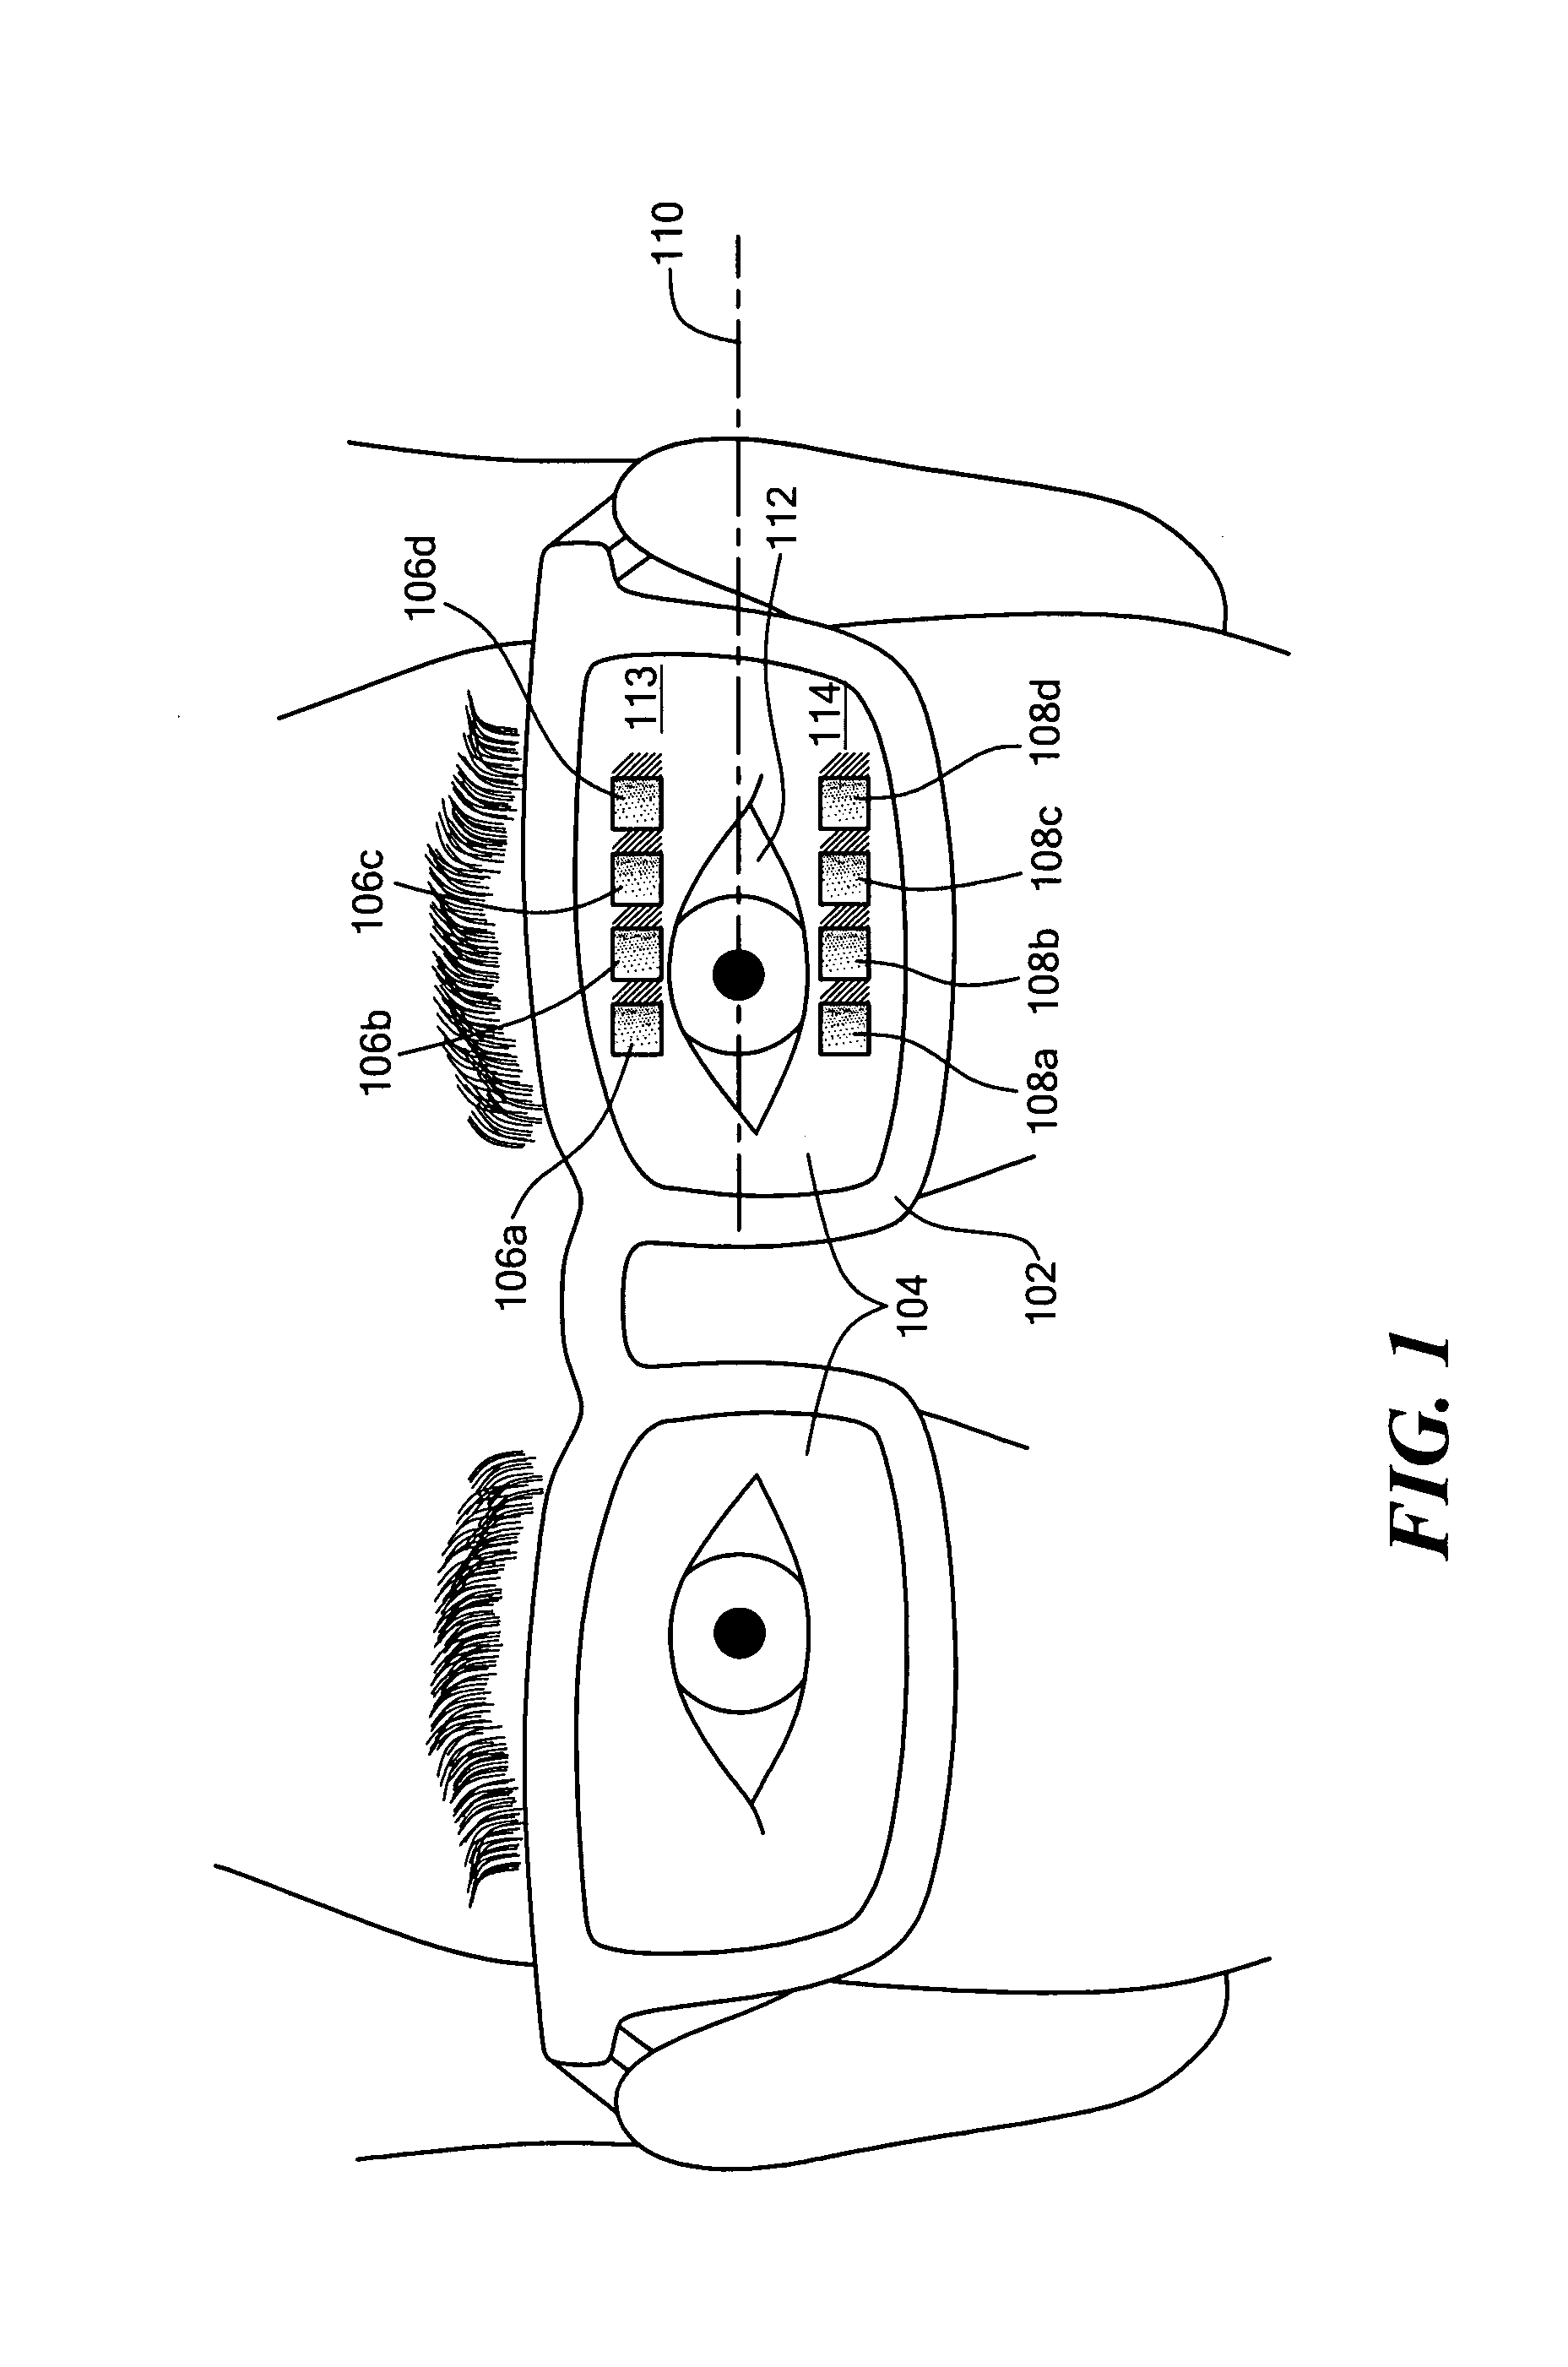 Peripheral field expansion device